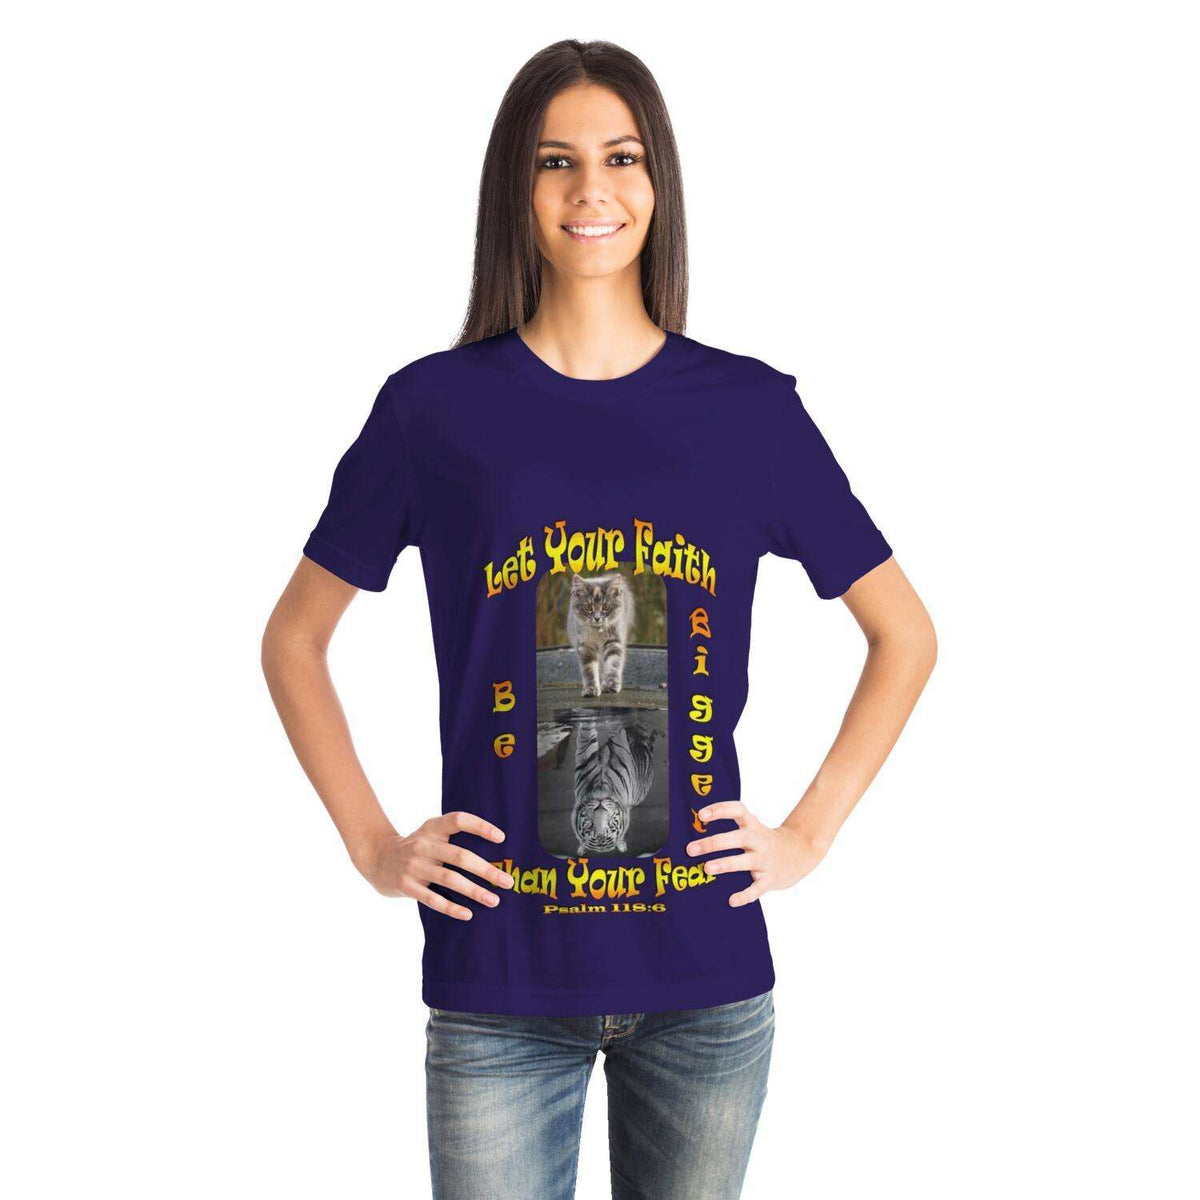 Designs by MyUtopia Shout Out:Let Your Faith Be Bigger Than Your Fear T-Shirt,XS,Adult Unisex T-Shirt